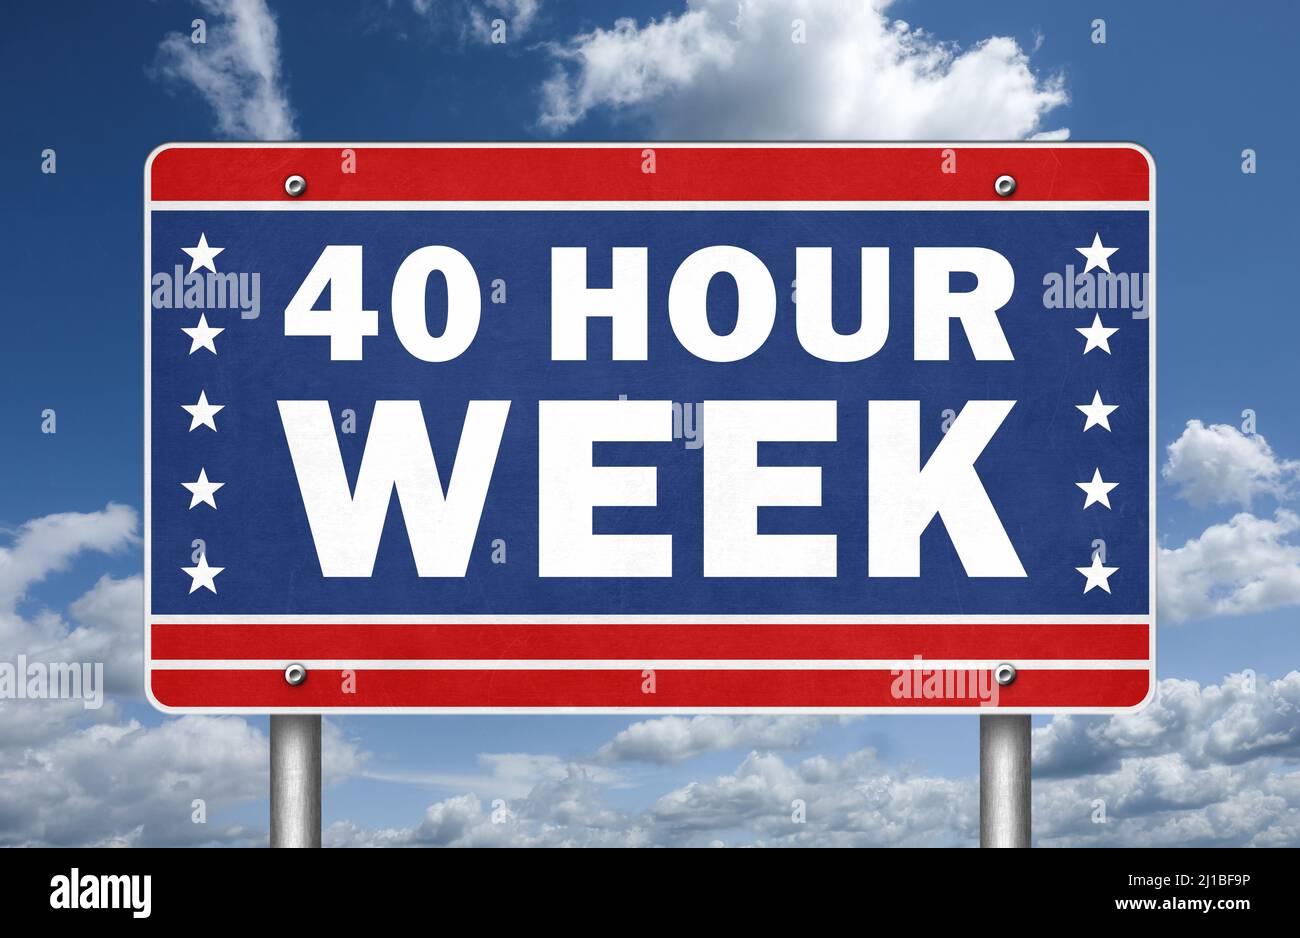 40 Hour Week - road sign illustration Stock Photo